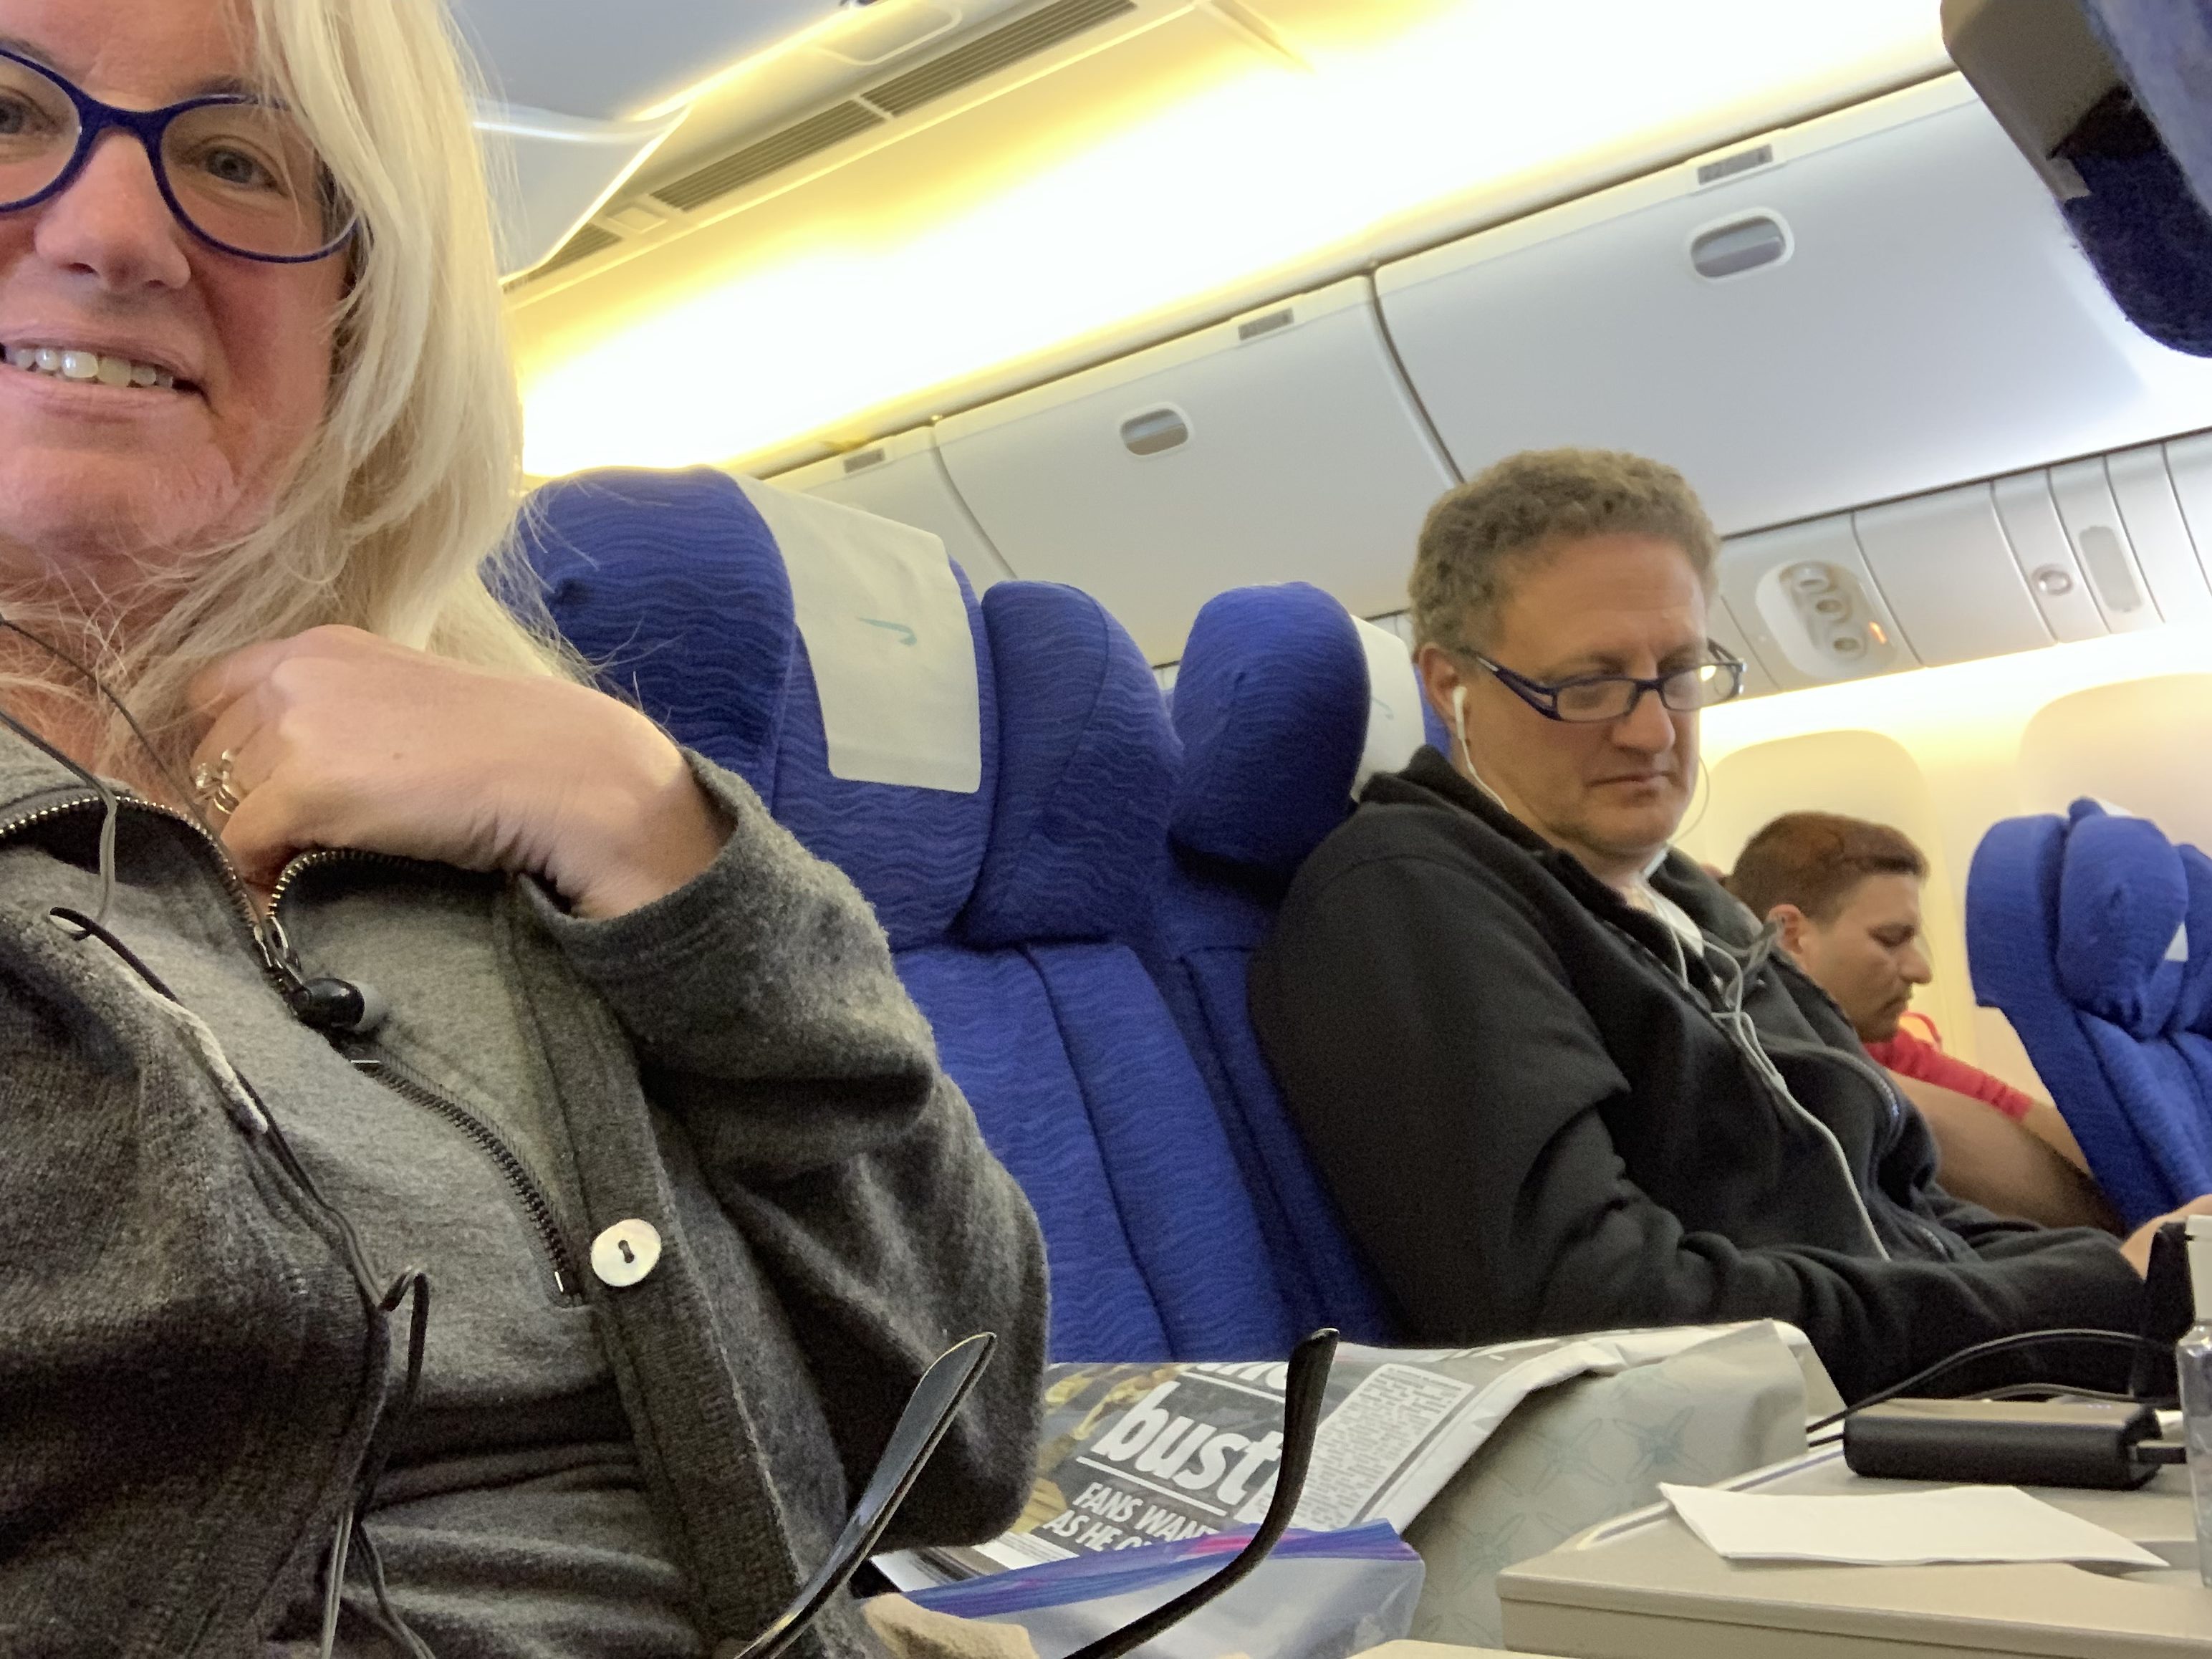 Airplane Passengers With An Empty Seat Between Them